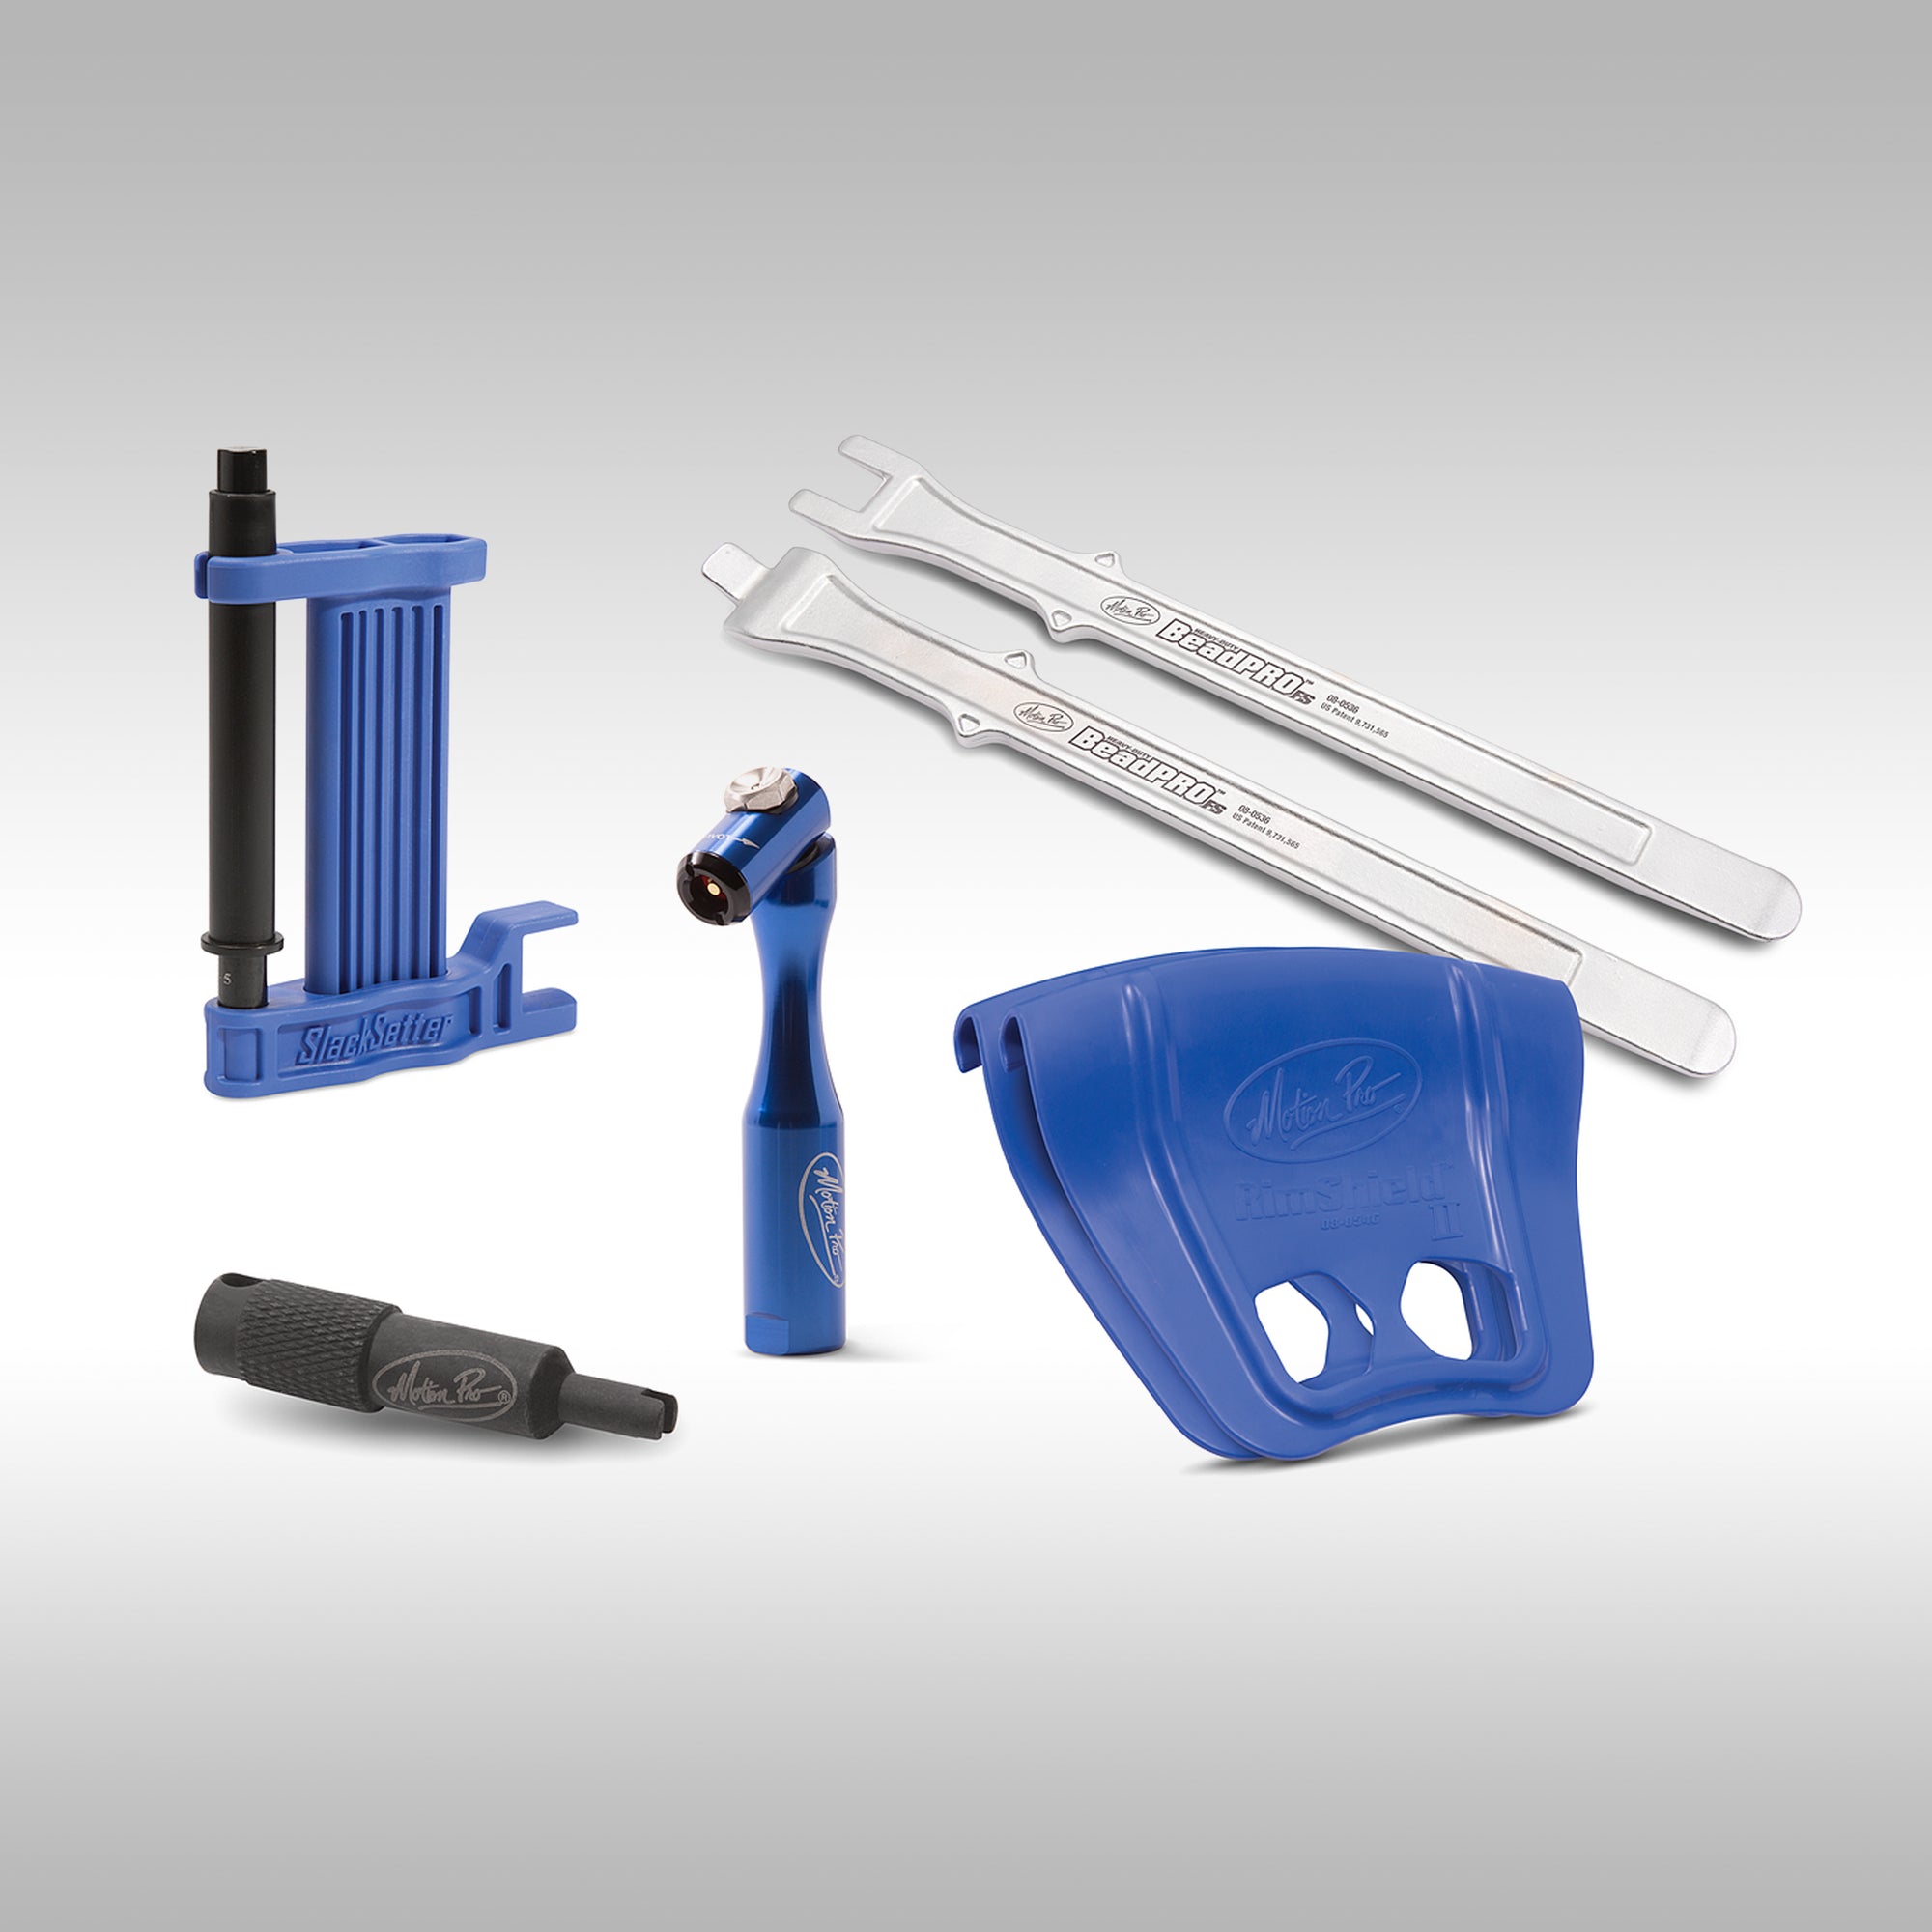 Motion Pro garage tire service tool kit. Key tools to have on hand for quick and easy motorcycle tire change. Changing motorcycle tires. What tools do I need to change my own motorcycle tires?